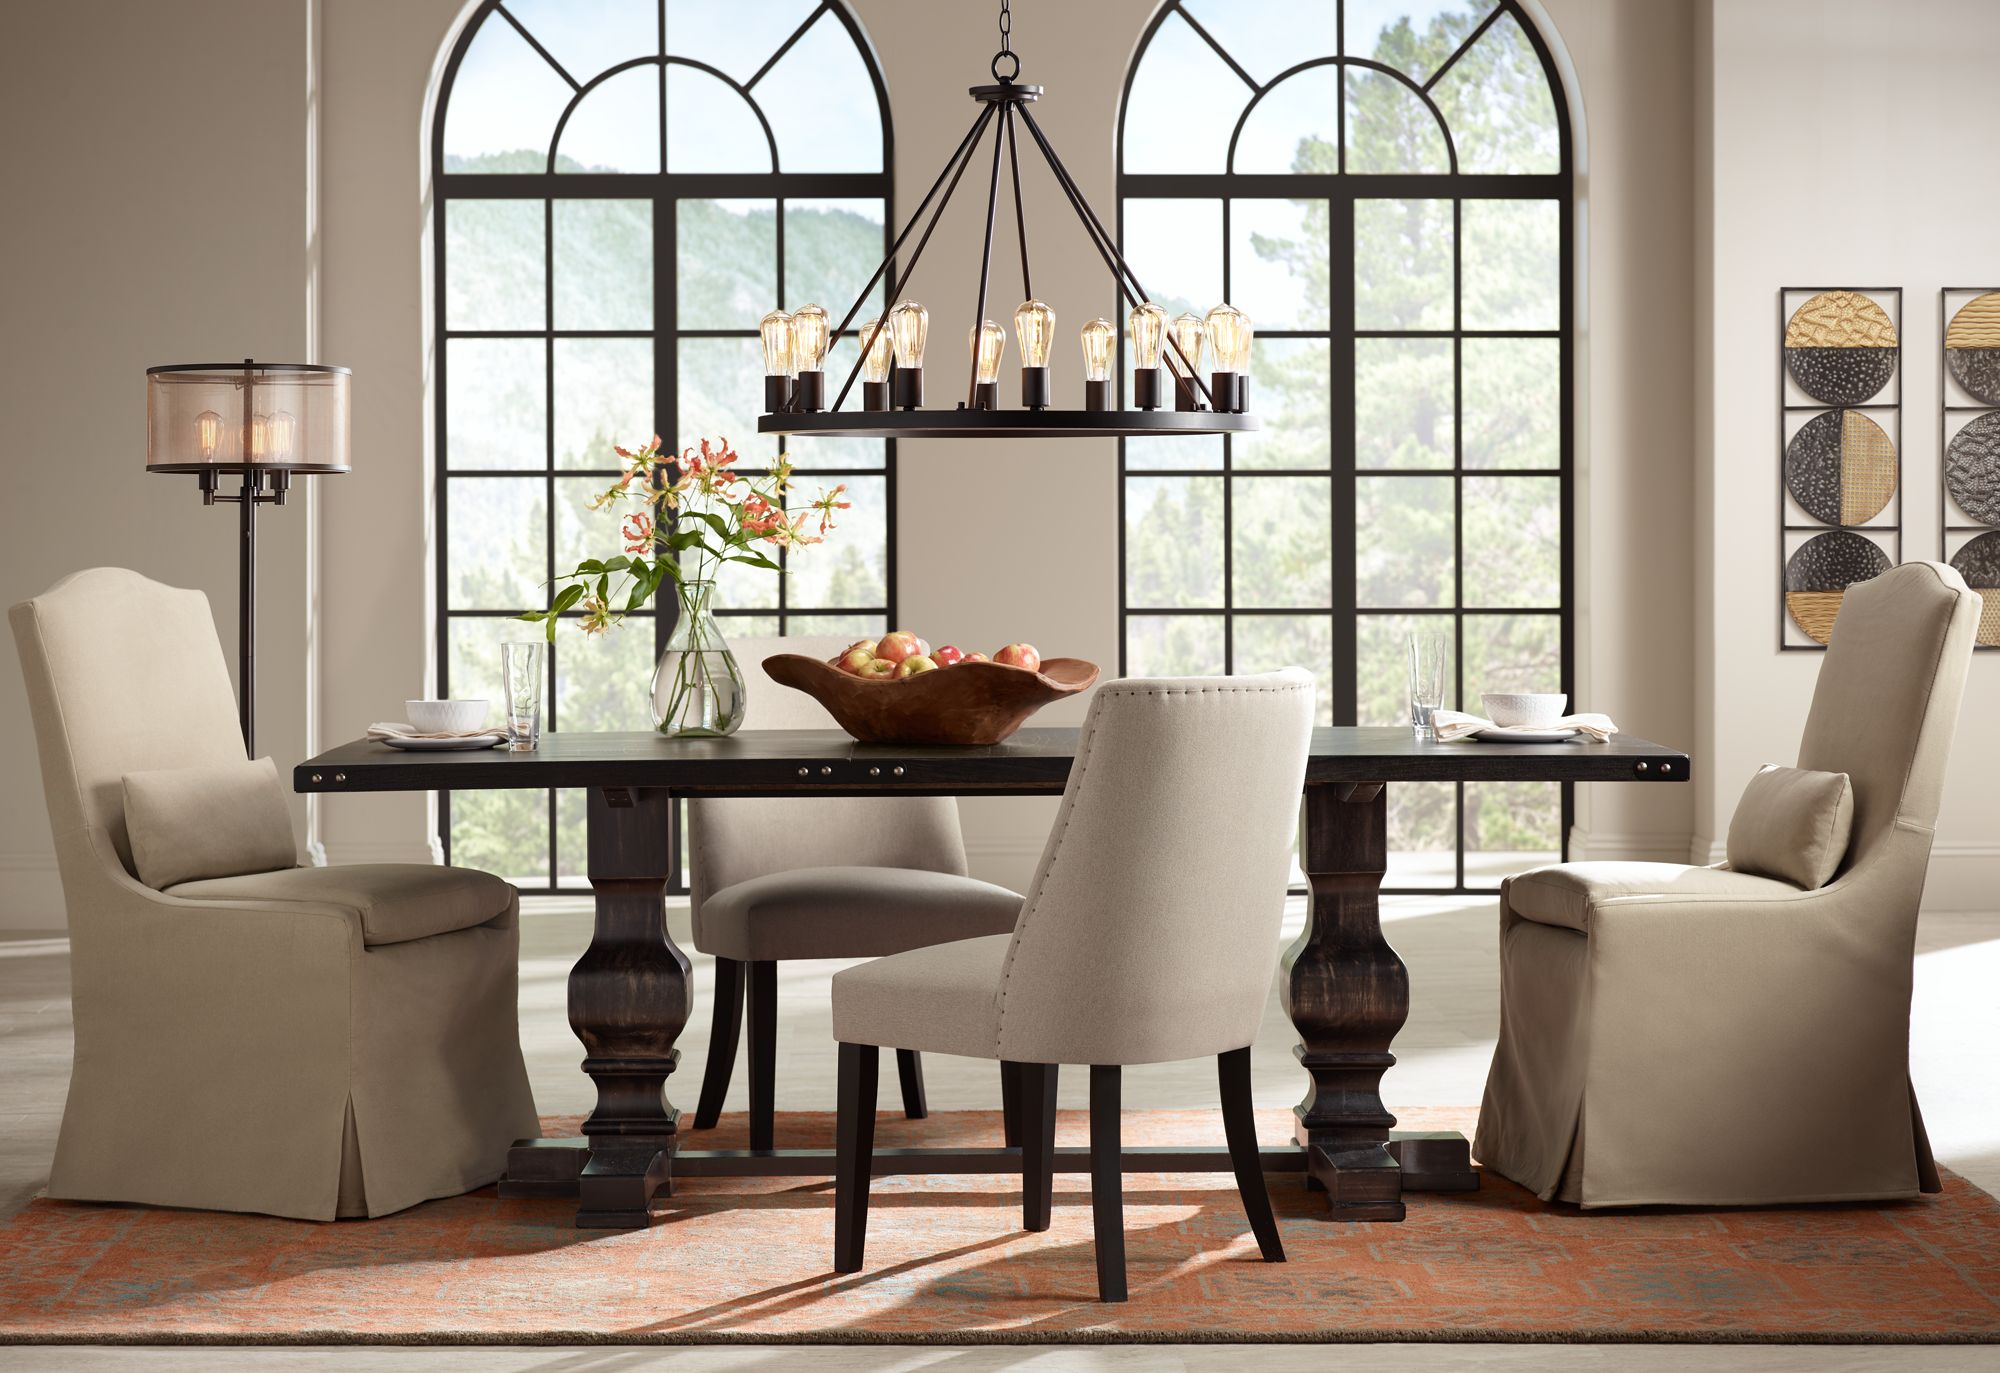 cool light fixtures for dining room